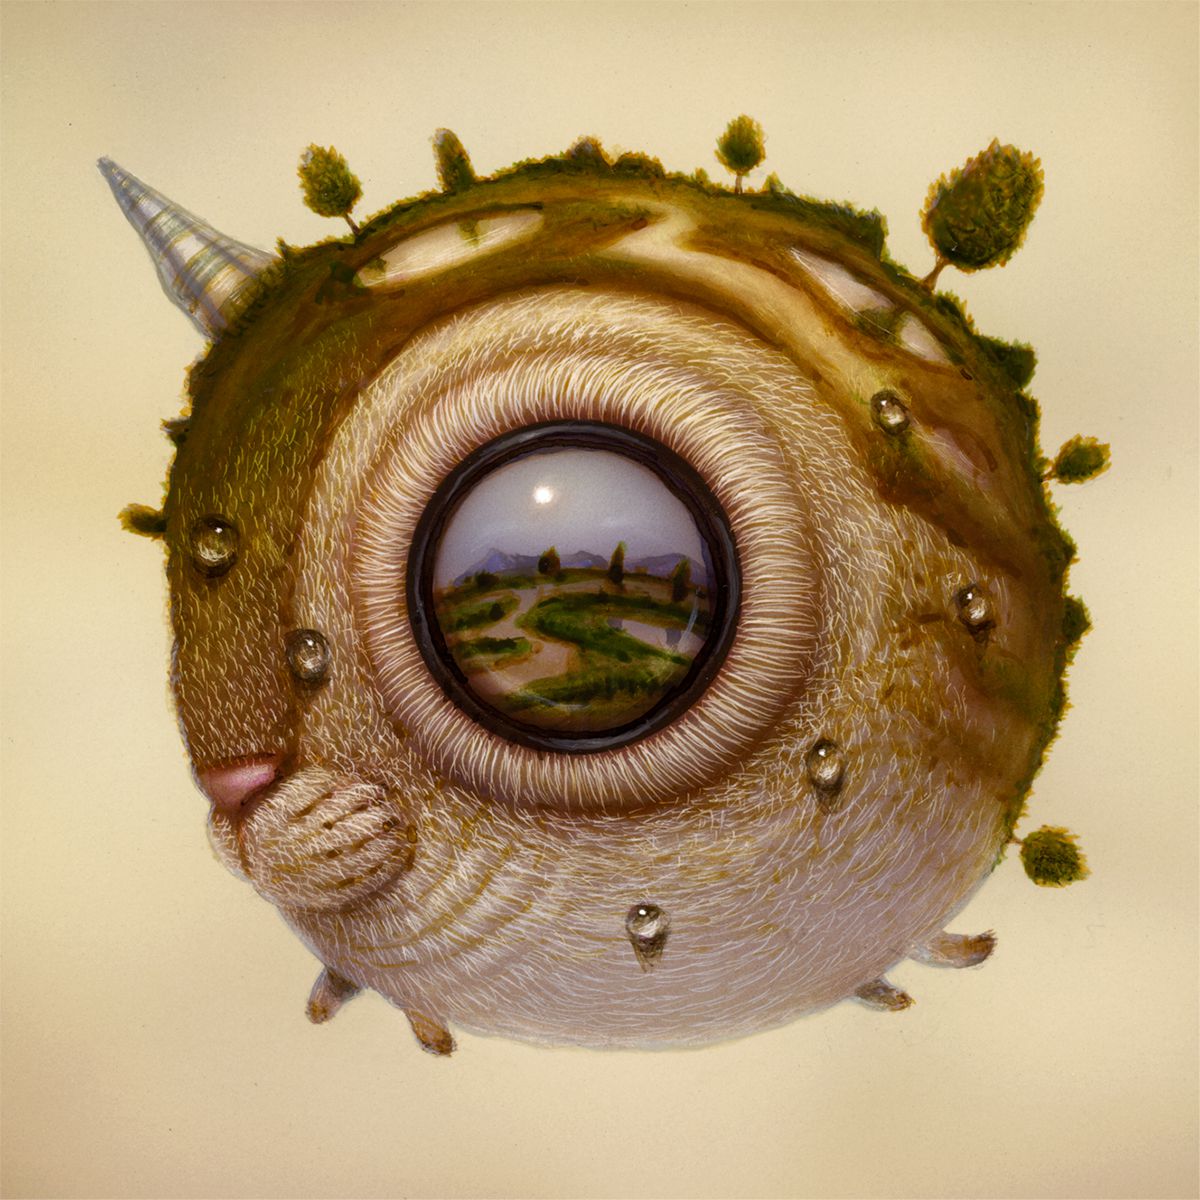 Quirky Fantastical Creatures With Oversized Eyes By Haoto Nattori 12